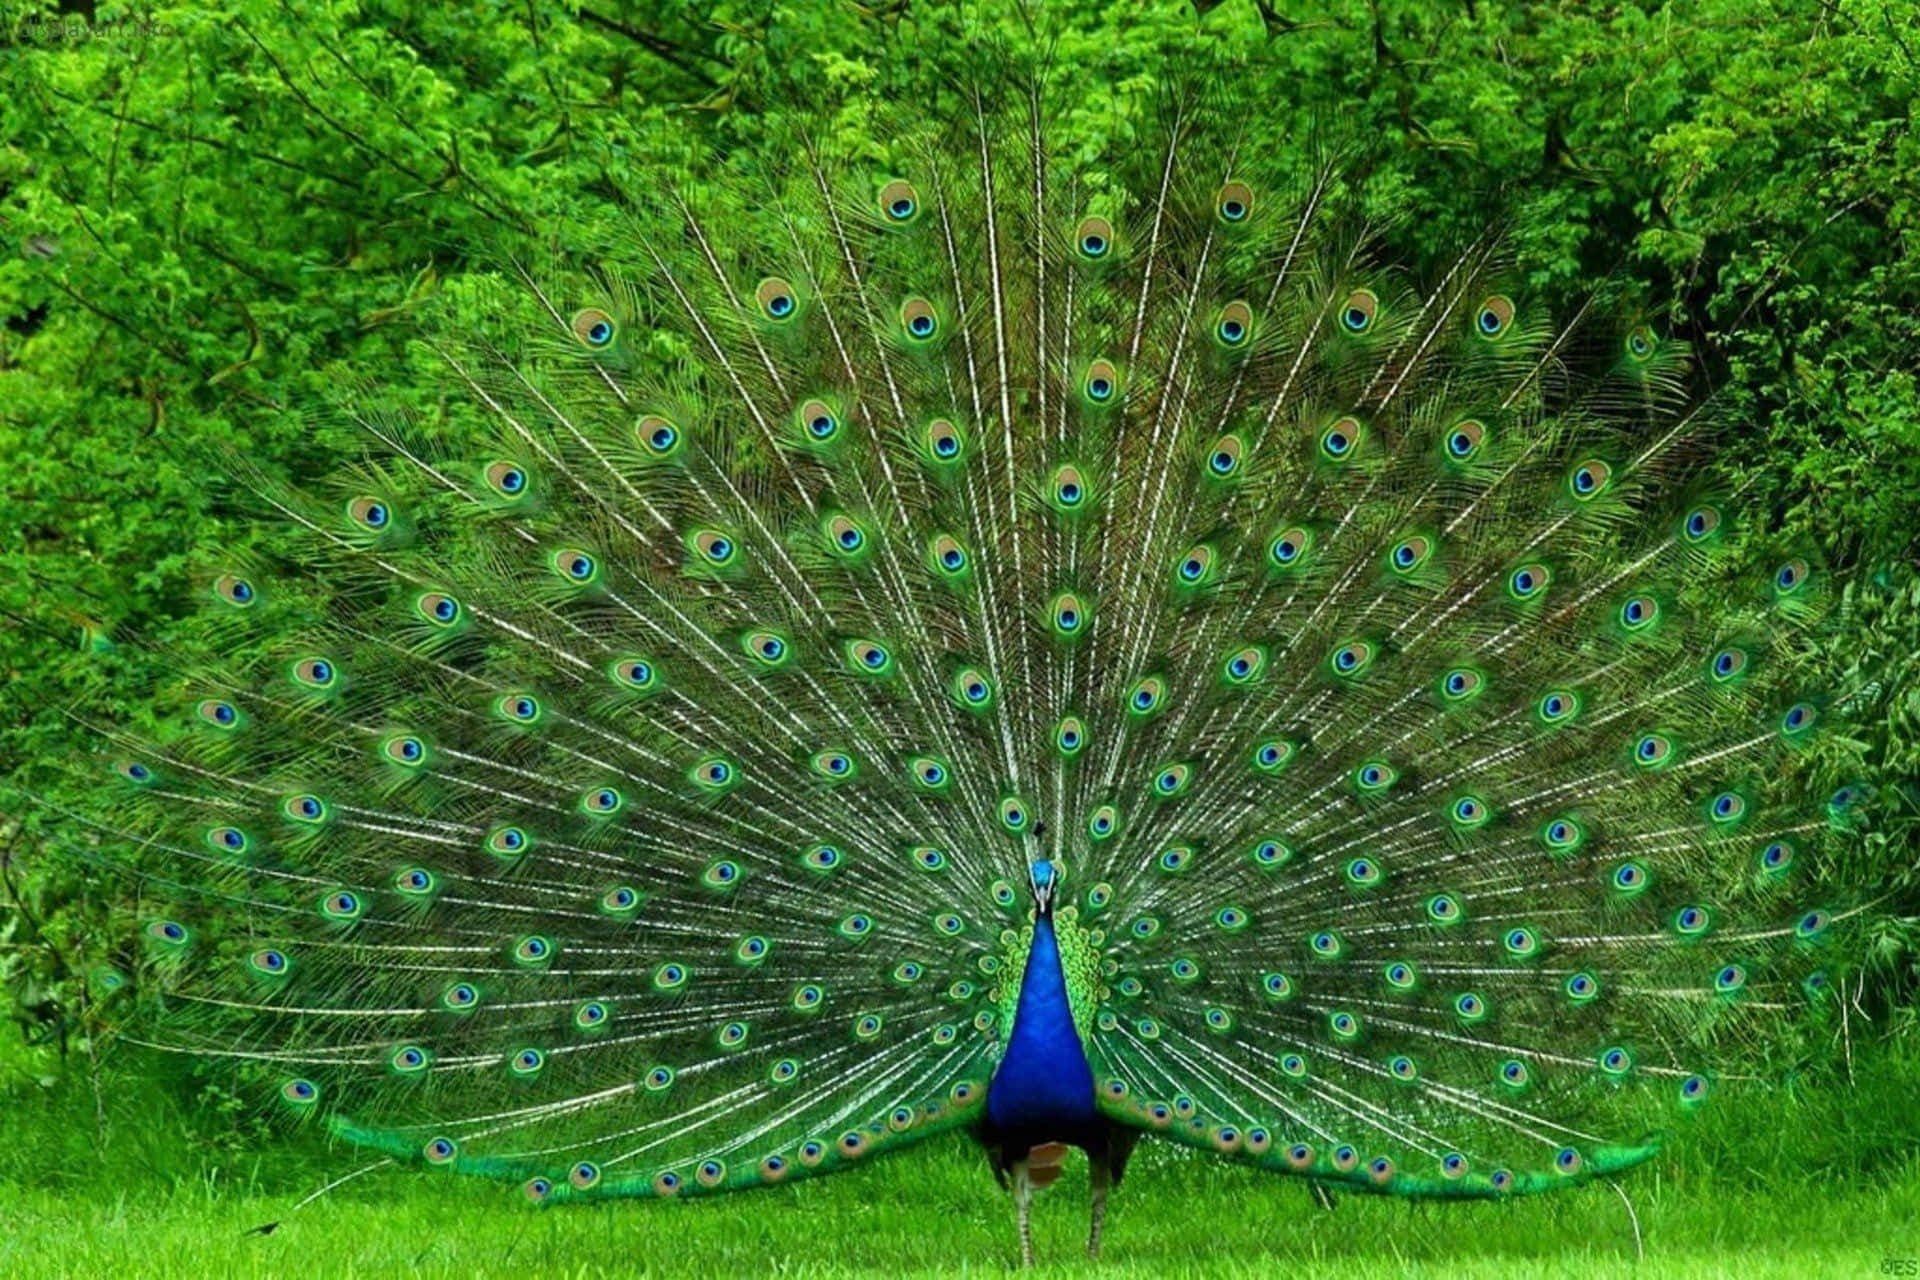 A regal peacock stands proud with its beautiful feathers spread.